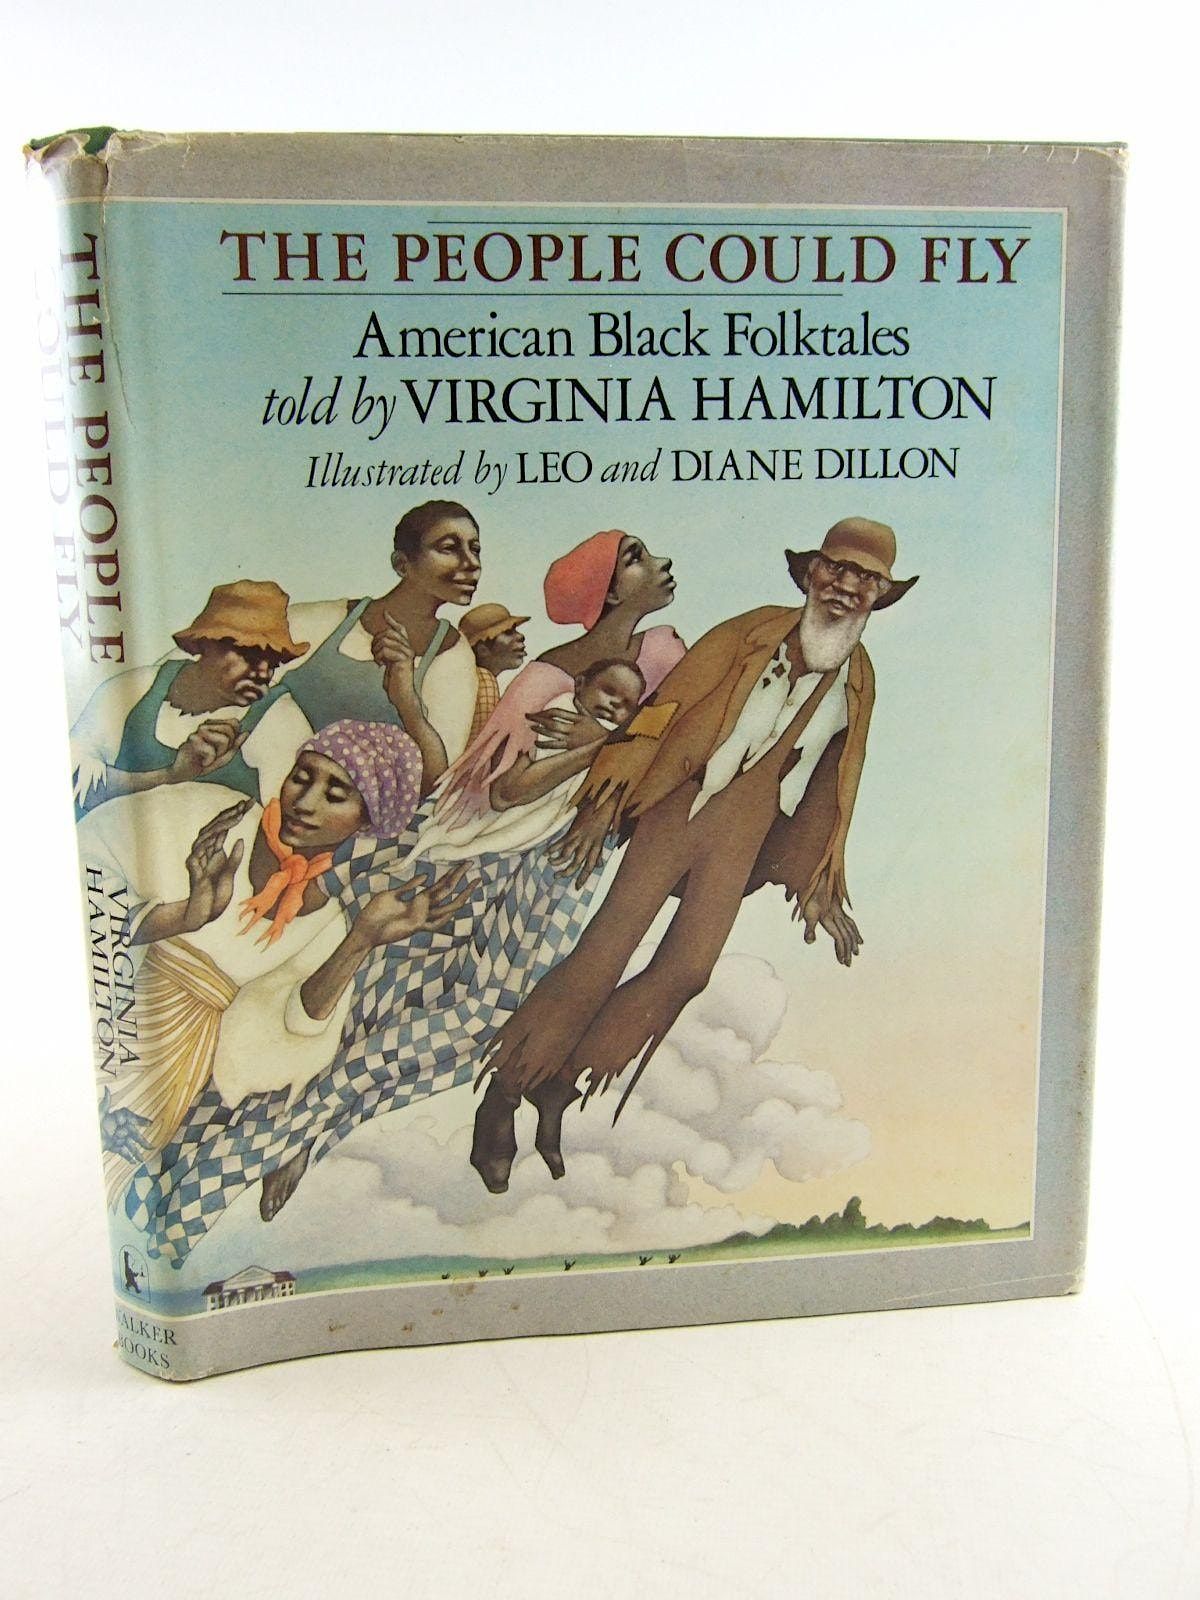 Lady CT presents The People Could Fly: An African American Folktale